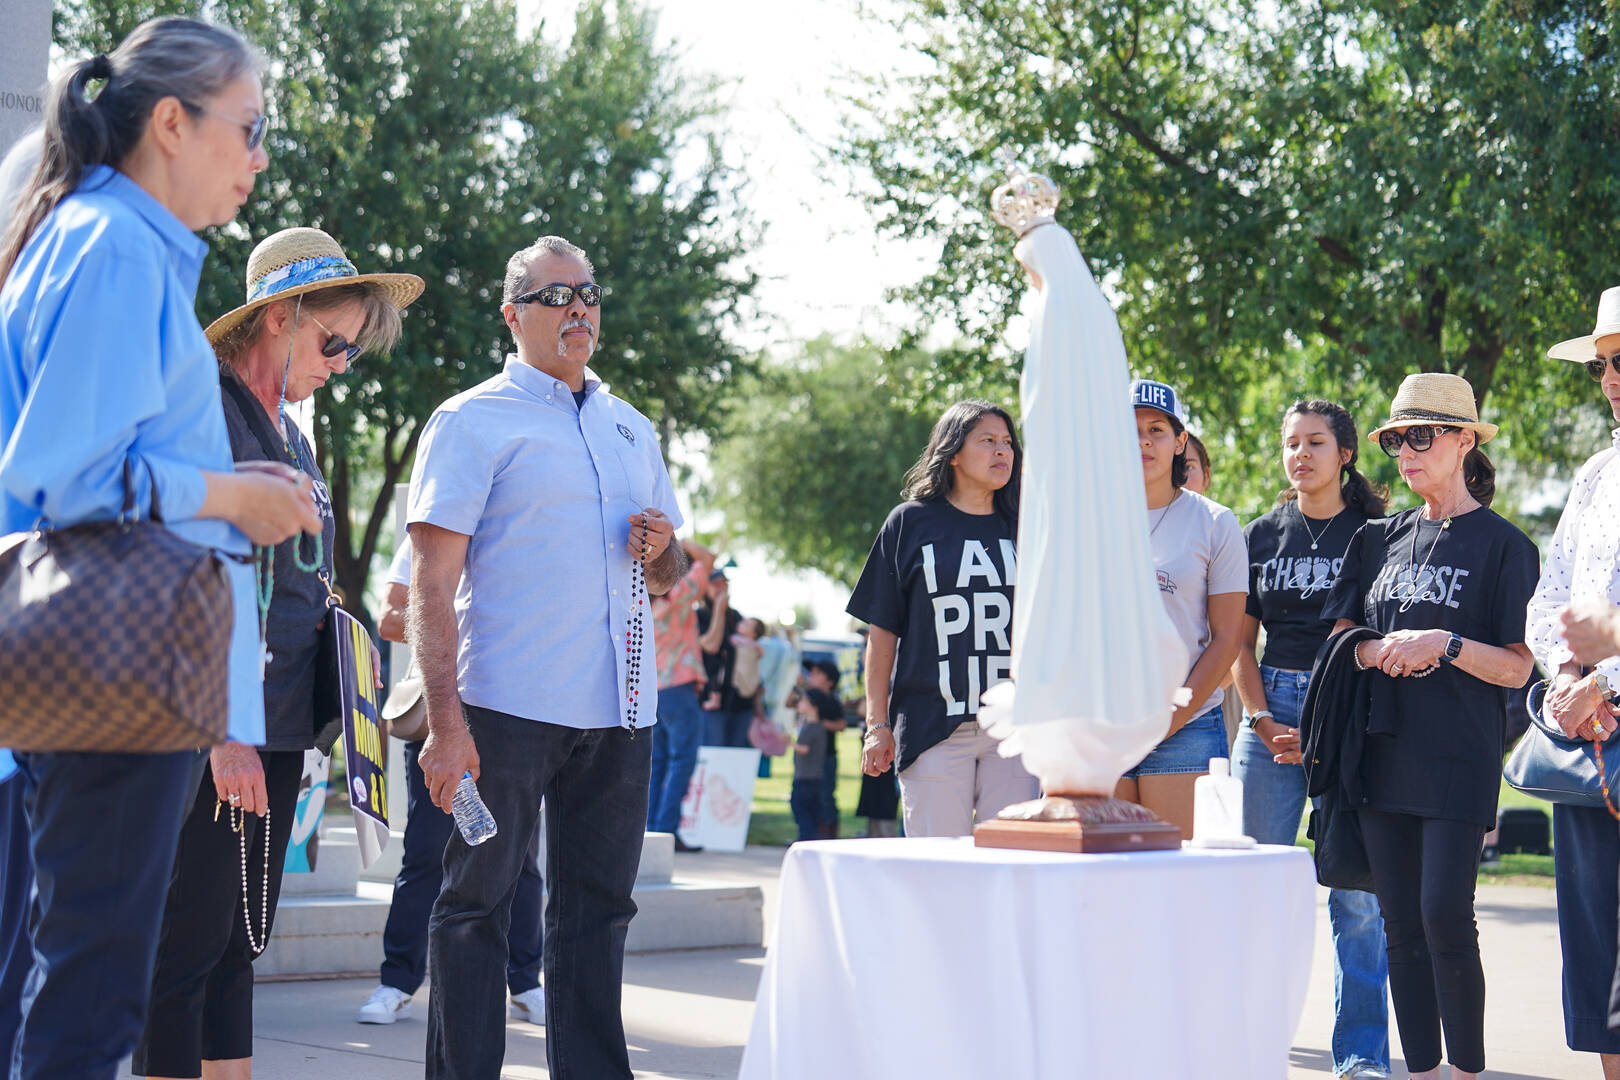 Jesse Romero, a popular Catholic evangelist and retreat leader, led a group praying the rosary April 25 at the Arizona Capitol. Mr. Romero said the church’s opposition to abortion has been clear since 70 A.D., as it was articulated in the Didache. (photo: J.D. Long García)